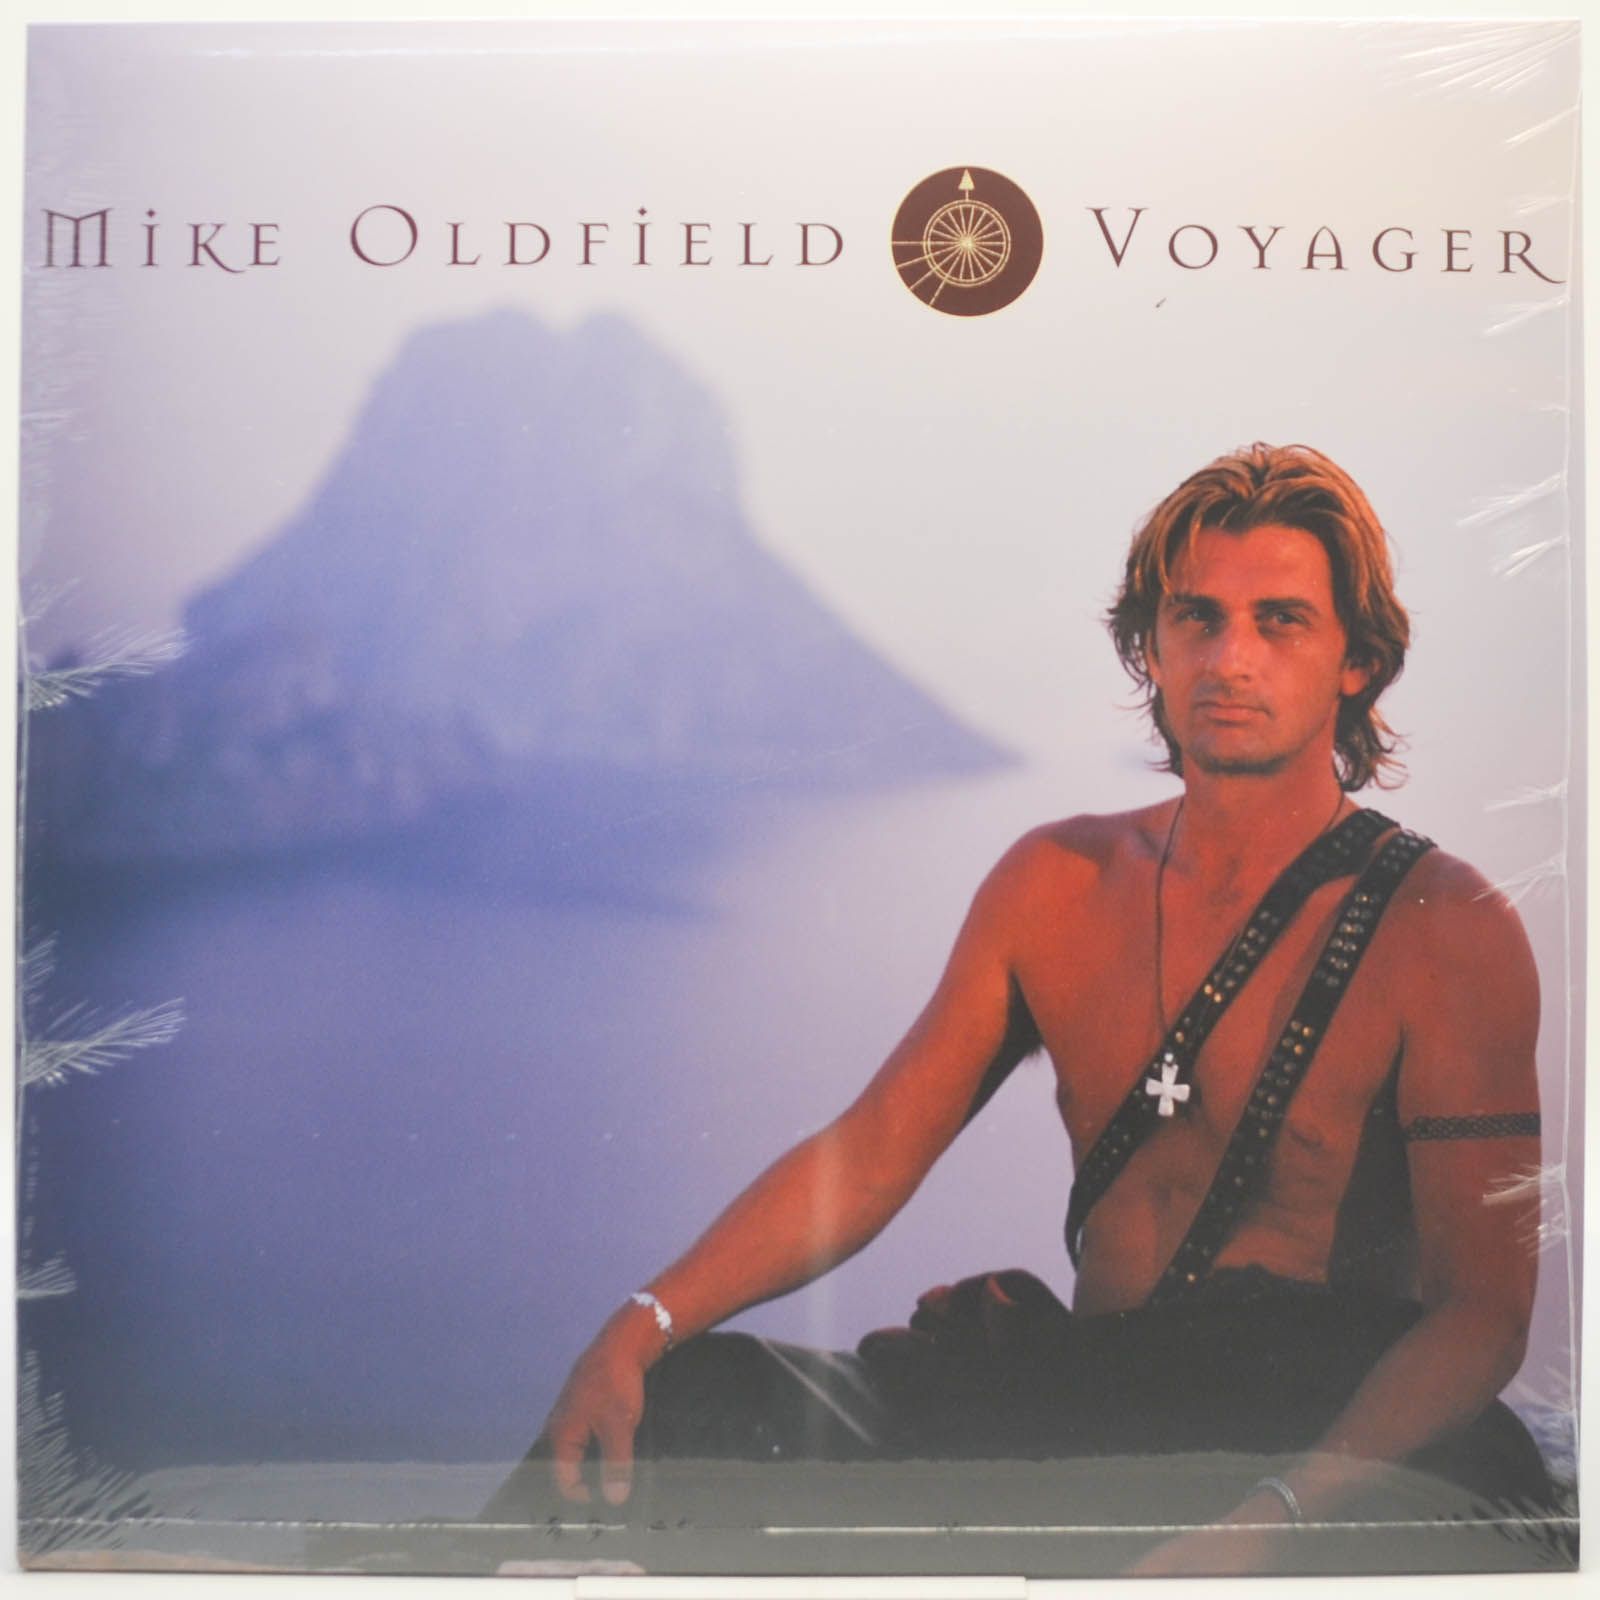 Mike Oldfield — Voyager, 1996